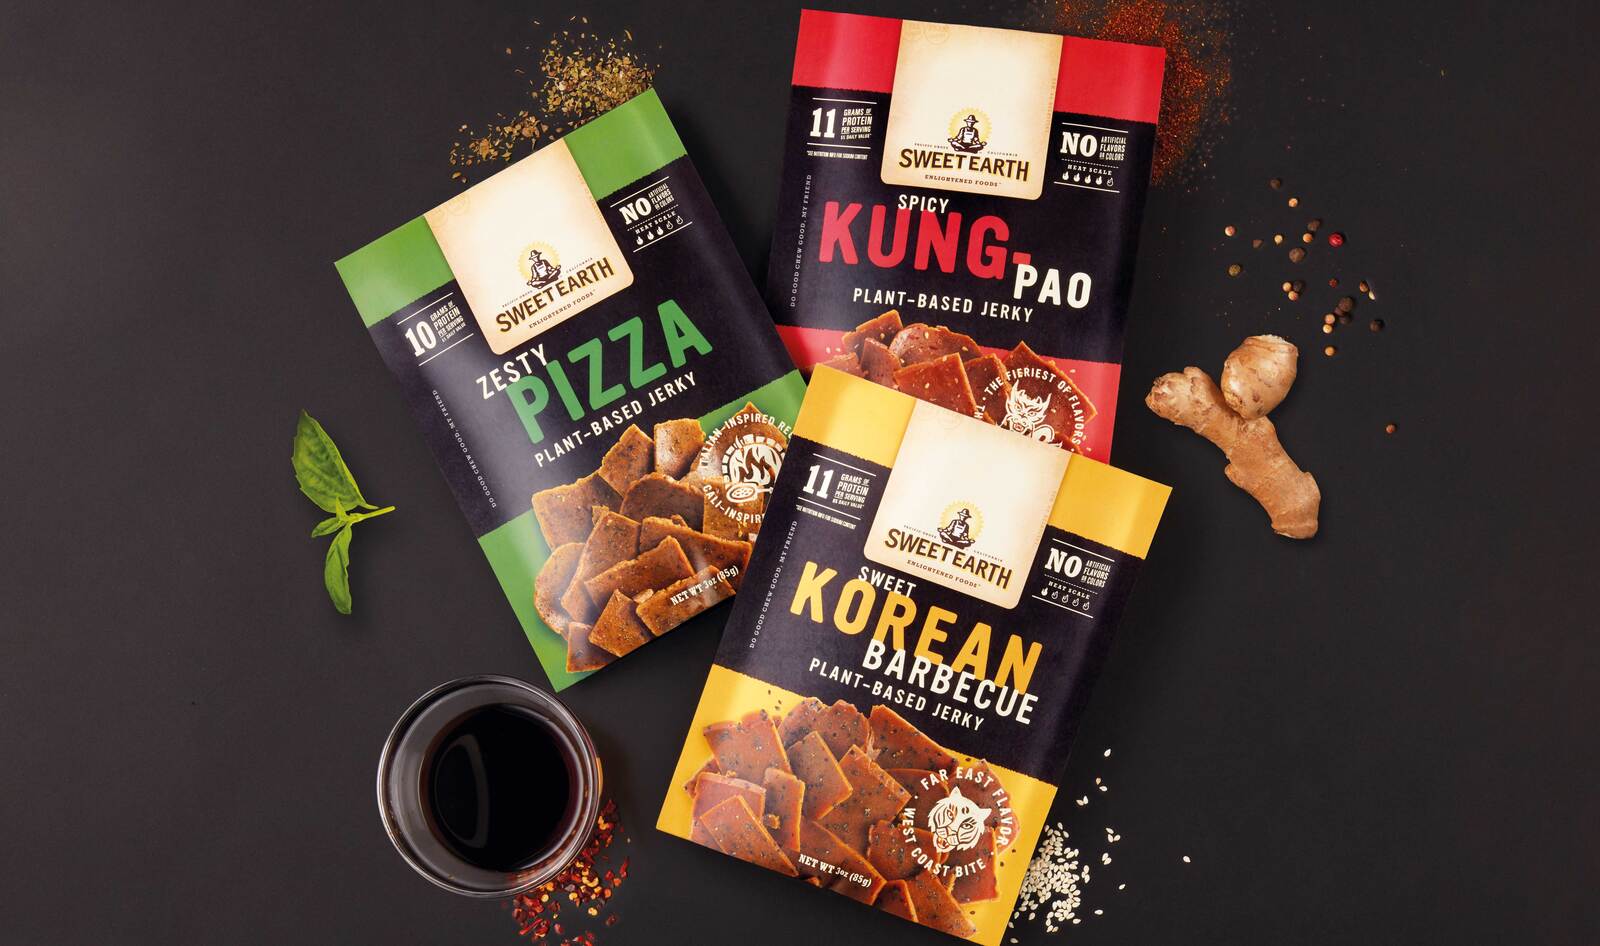 Sweet Earth Debuts Vegan Jerky in Pizza, Korean Barbecue, and Spicy Kung Pao Flavors&nbsp;